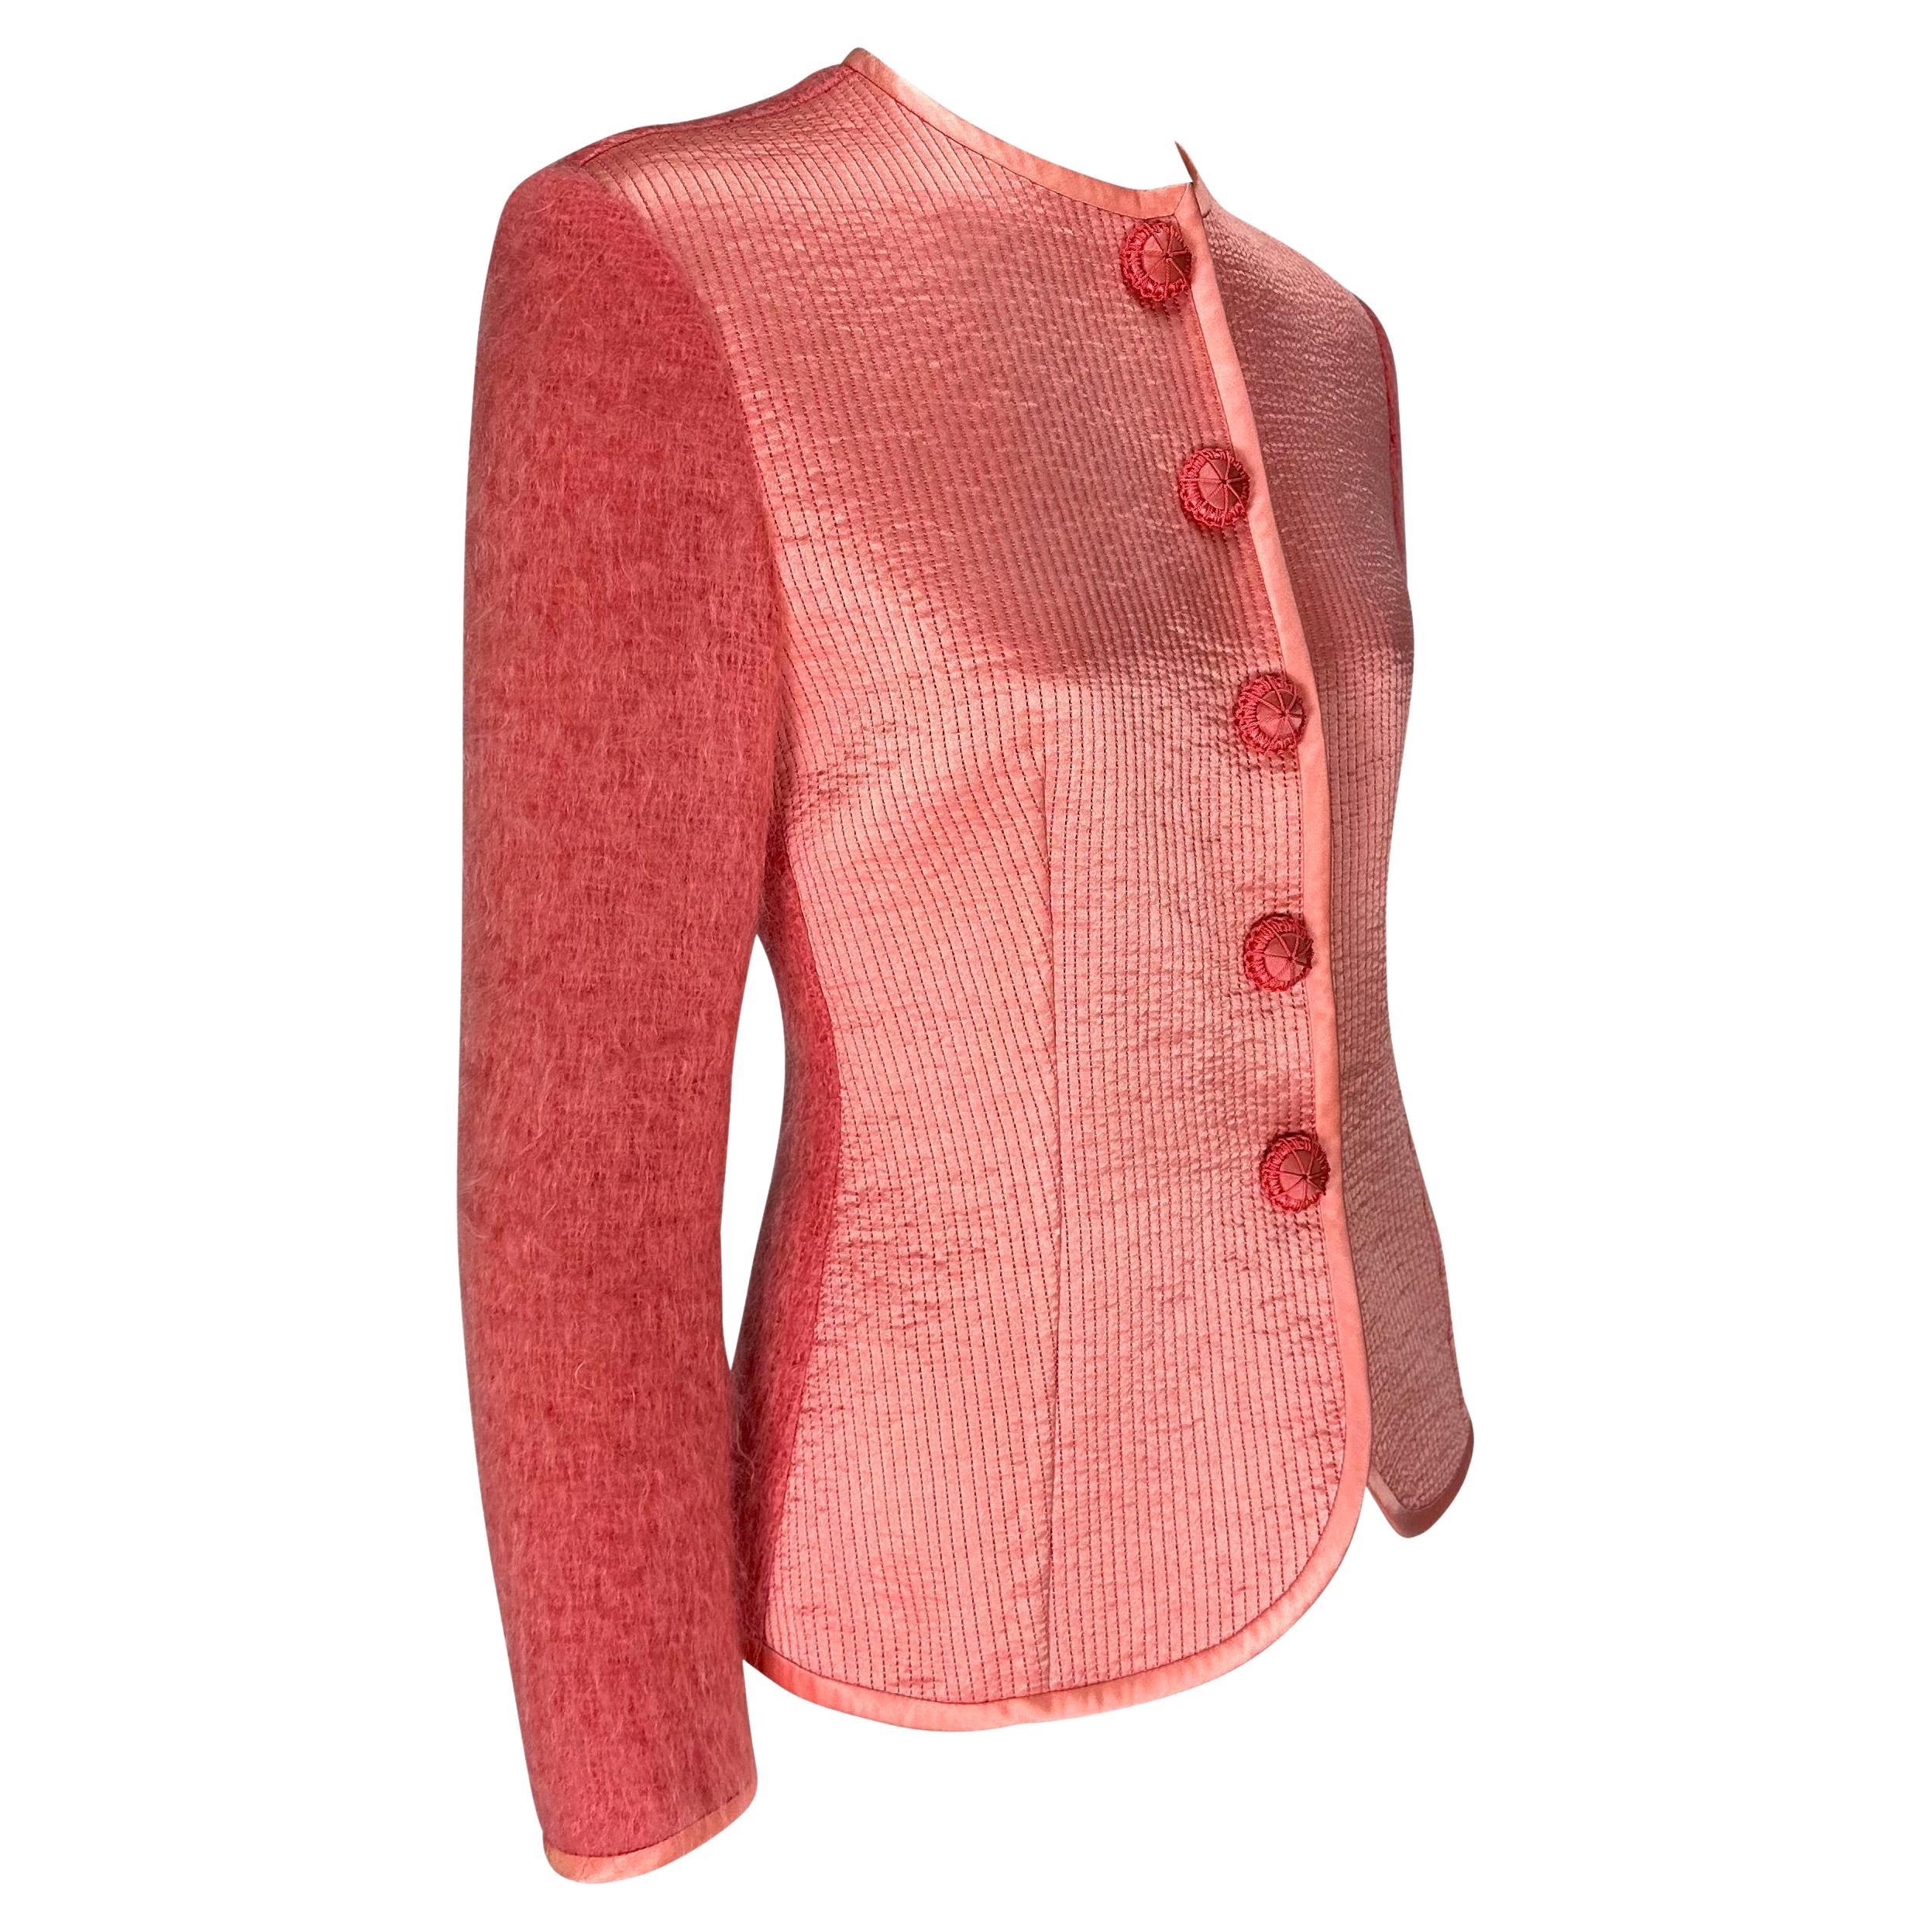 F/W 1995 Christian Dior by Gianfranco Ferré Runway Pink Satin Mohair Jacket For Sale 5